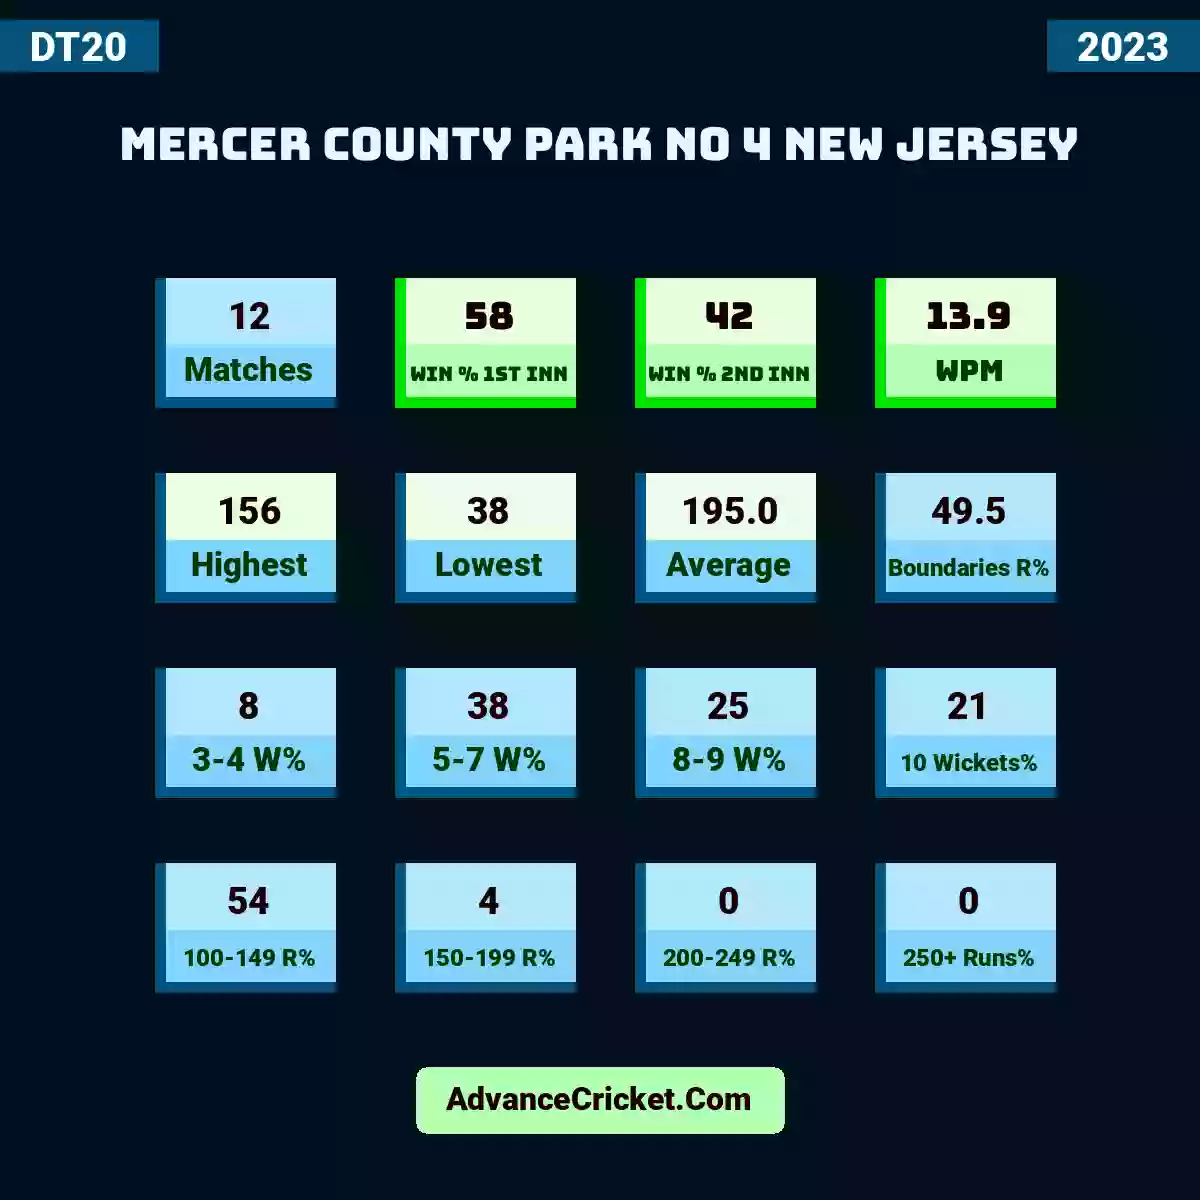 Image showing Mercer County Park no 4 New Jersey with Matches: 12, Win % 1st Inn: 58, Win % 2nd Inn: 42, WPM: 13.9, Highest: 156, Lowest: 38, Average: 195.0, Boundaries R%: 49.5, 3-4 W%: 8, 5-7 W%: 38, 8-9 W%: 25, 10 Wickets%: 21, 100-149 R%: 54, 150-199 R%: 4, 200-249 R%: 0, 250+ Runs%: 0.